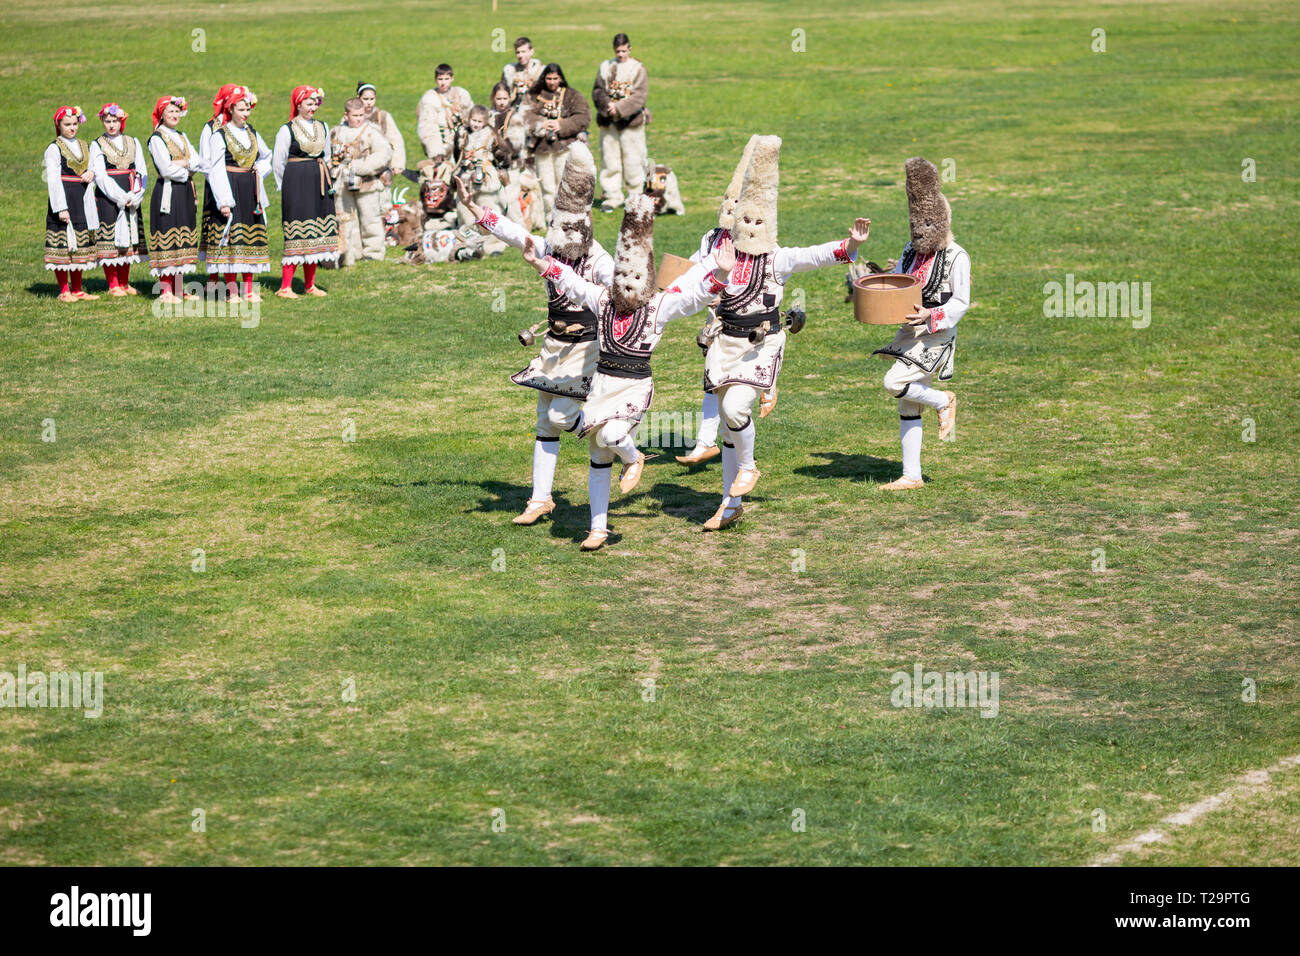 VARVARA, BULGARIA - MARCH 24, 2019: Moment from National Festival Dervish Varvara presents traditions of Bulgarian Kuker Games. Performers present the Stock Photo